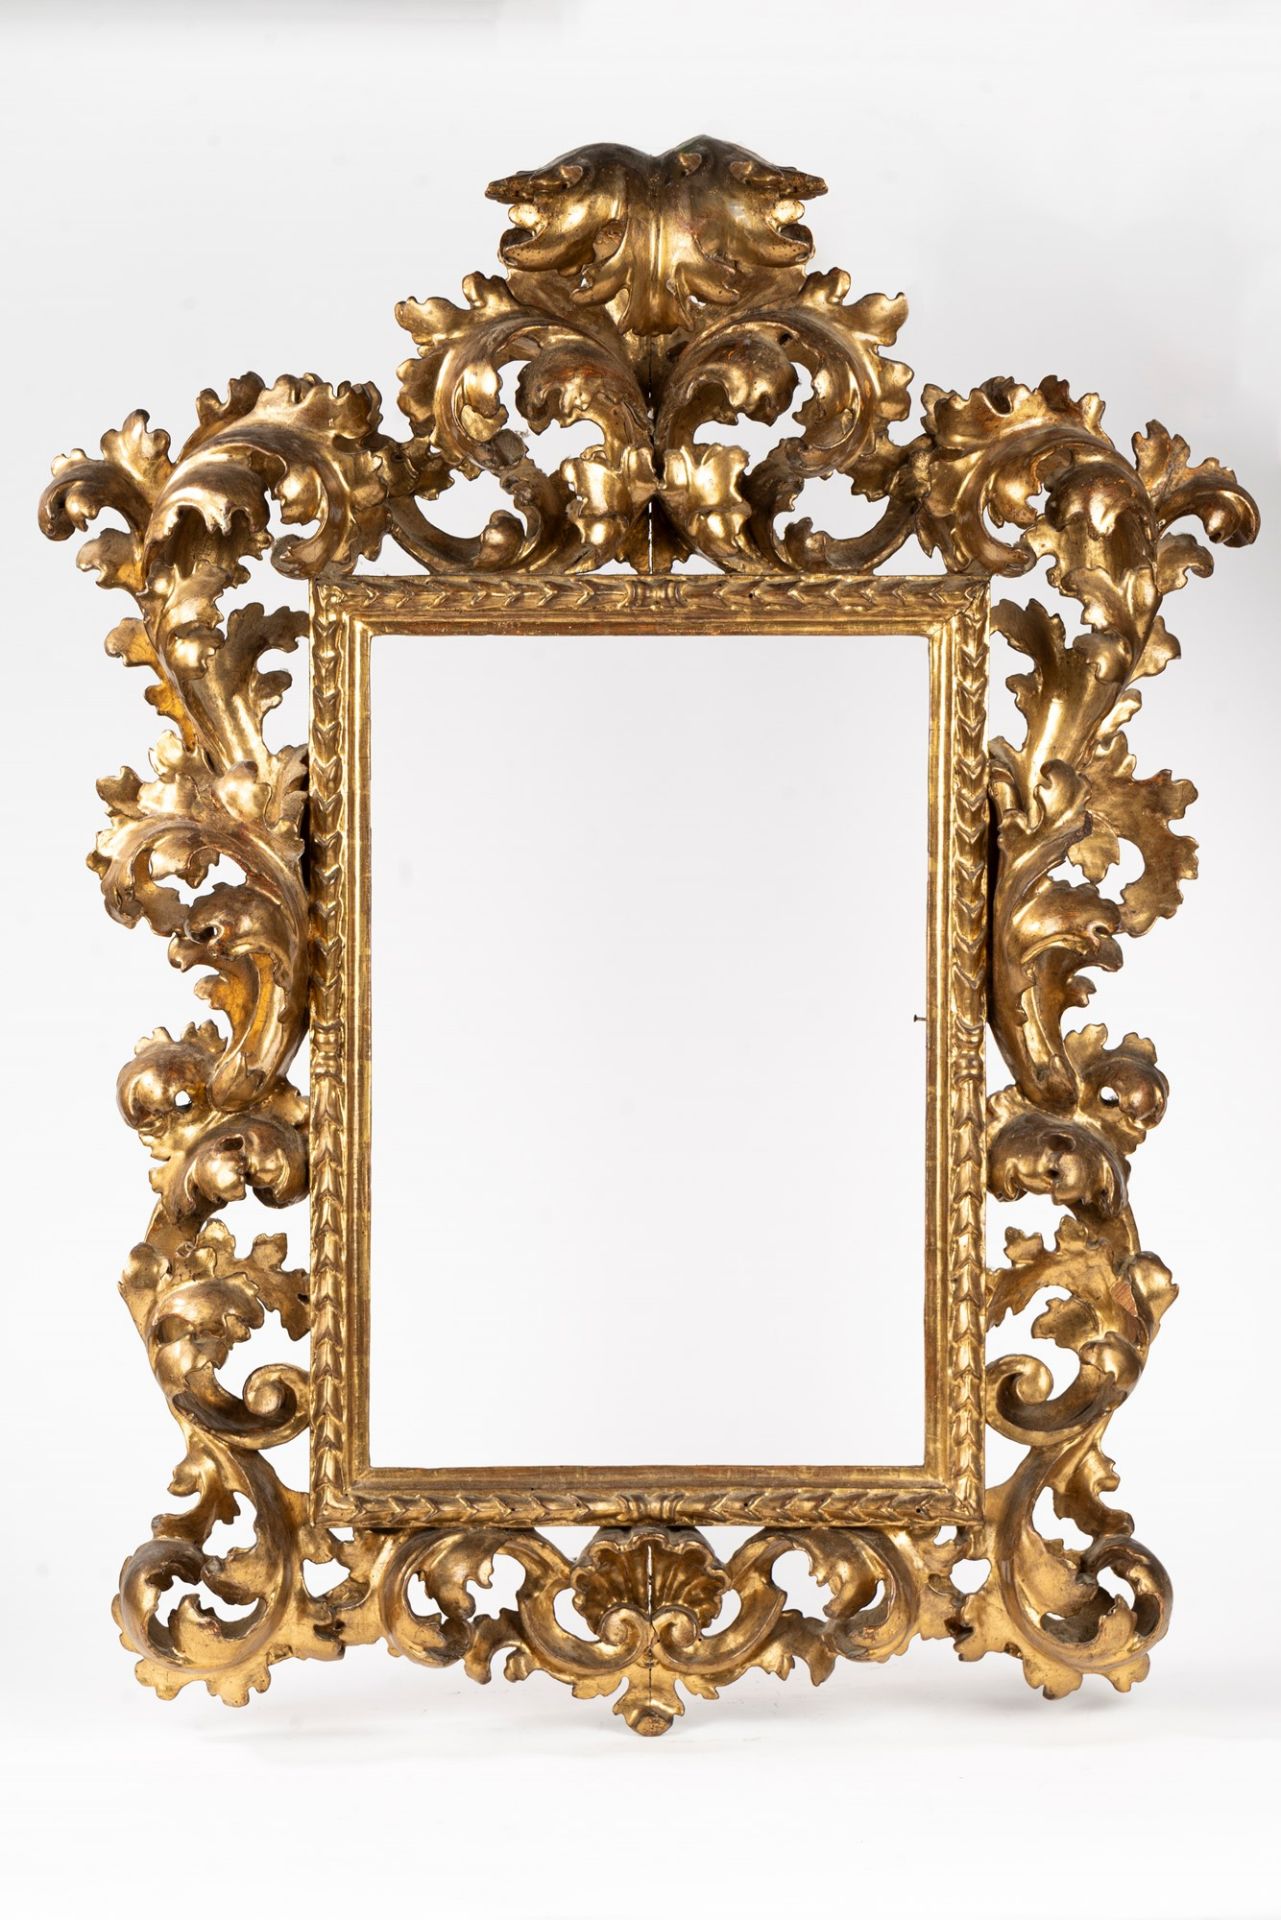 Carved and gilded wood frame, 19th century